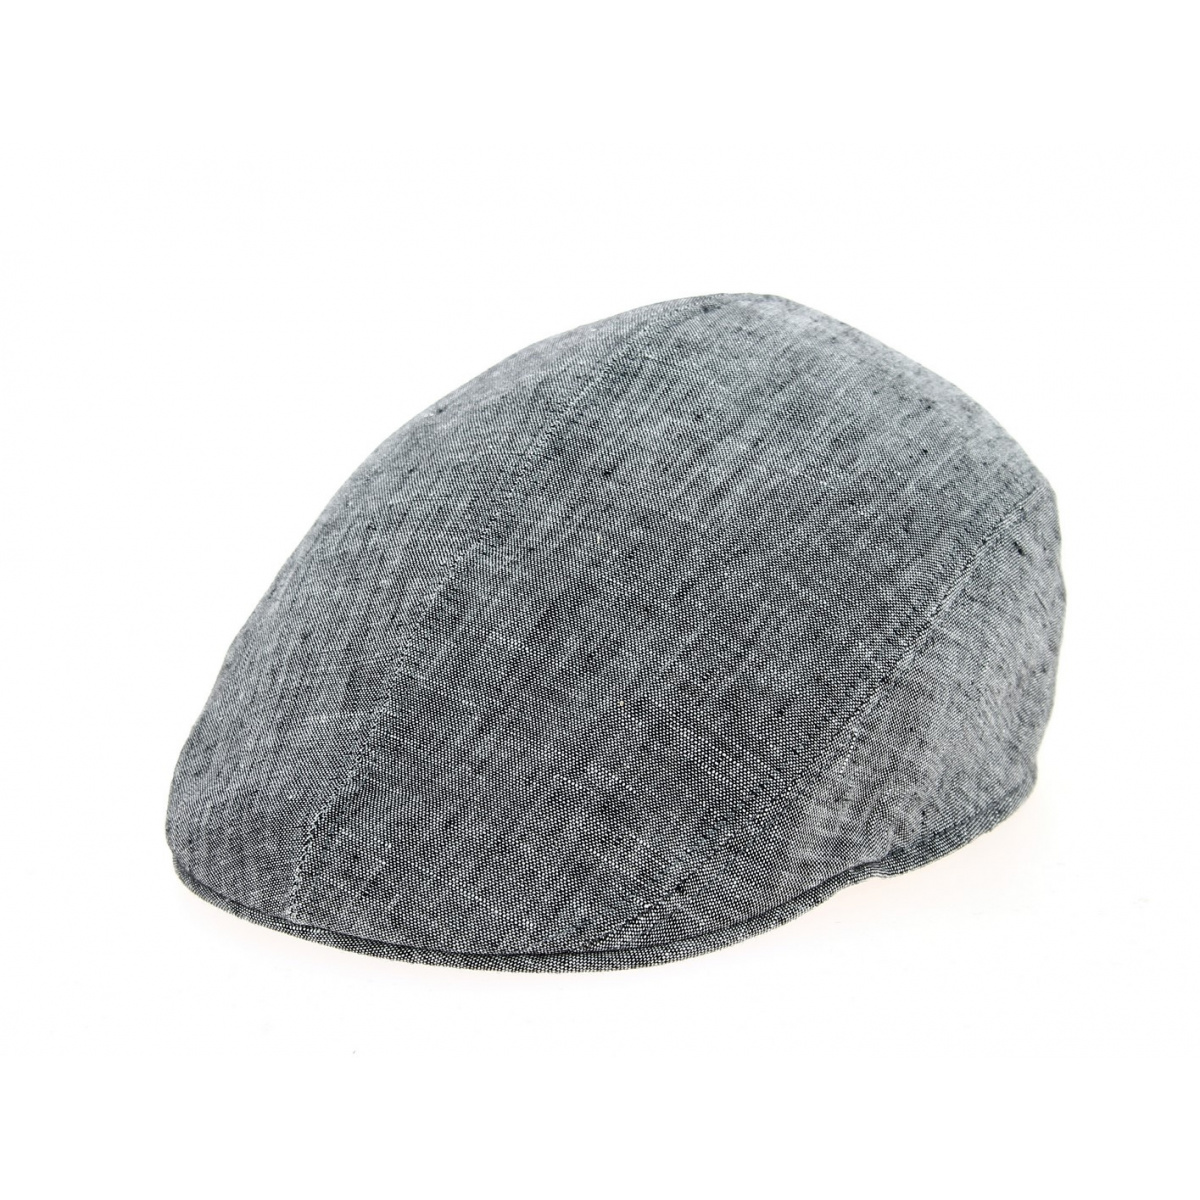 https://media3.chapellerie-traclet.com/67262-thickbox_default/casquette-plate-brighton-lin-anthracite-crambes-.jpg